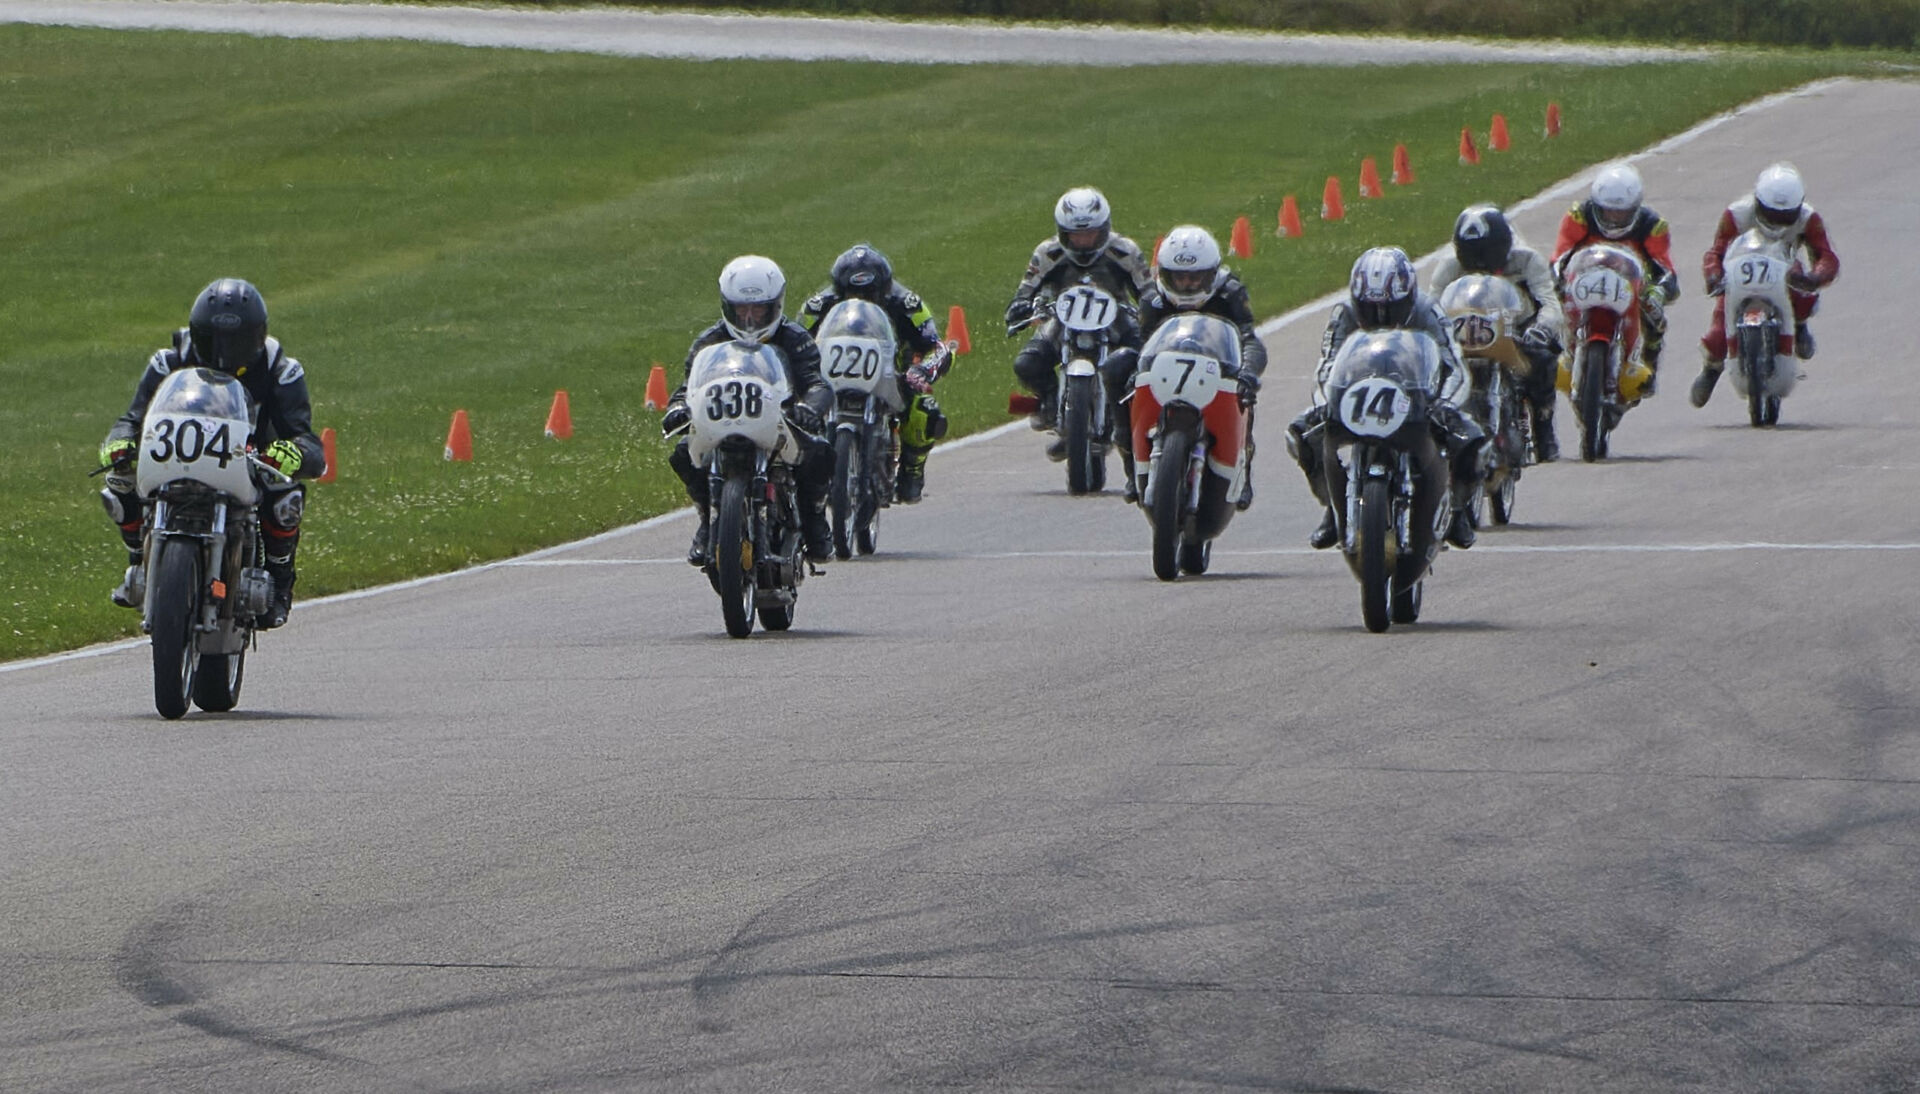 The start of an AHRMA race at Gingerman Raceway with Kevin Dinsmoor (304) leading the combined, three-class field including Andy Findling (338), Tim Terrell (220), Dave Roper (7), Alex McLean (14), Robert Himmelmann (777), Stuart Sanders (215), Craigi Hirko (641), and David Rhodes (97) into Turn One. Photo by Bill Griffin, courtesy AHRMA.